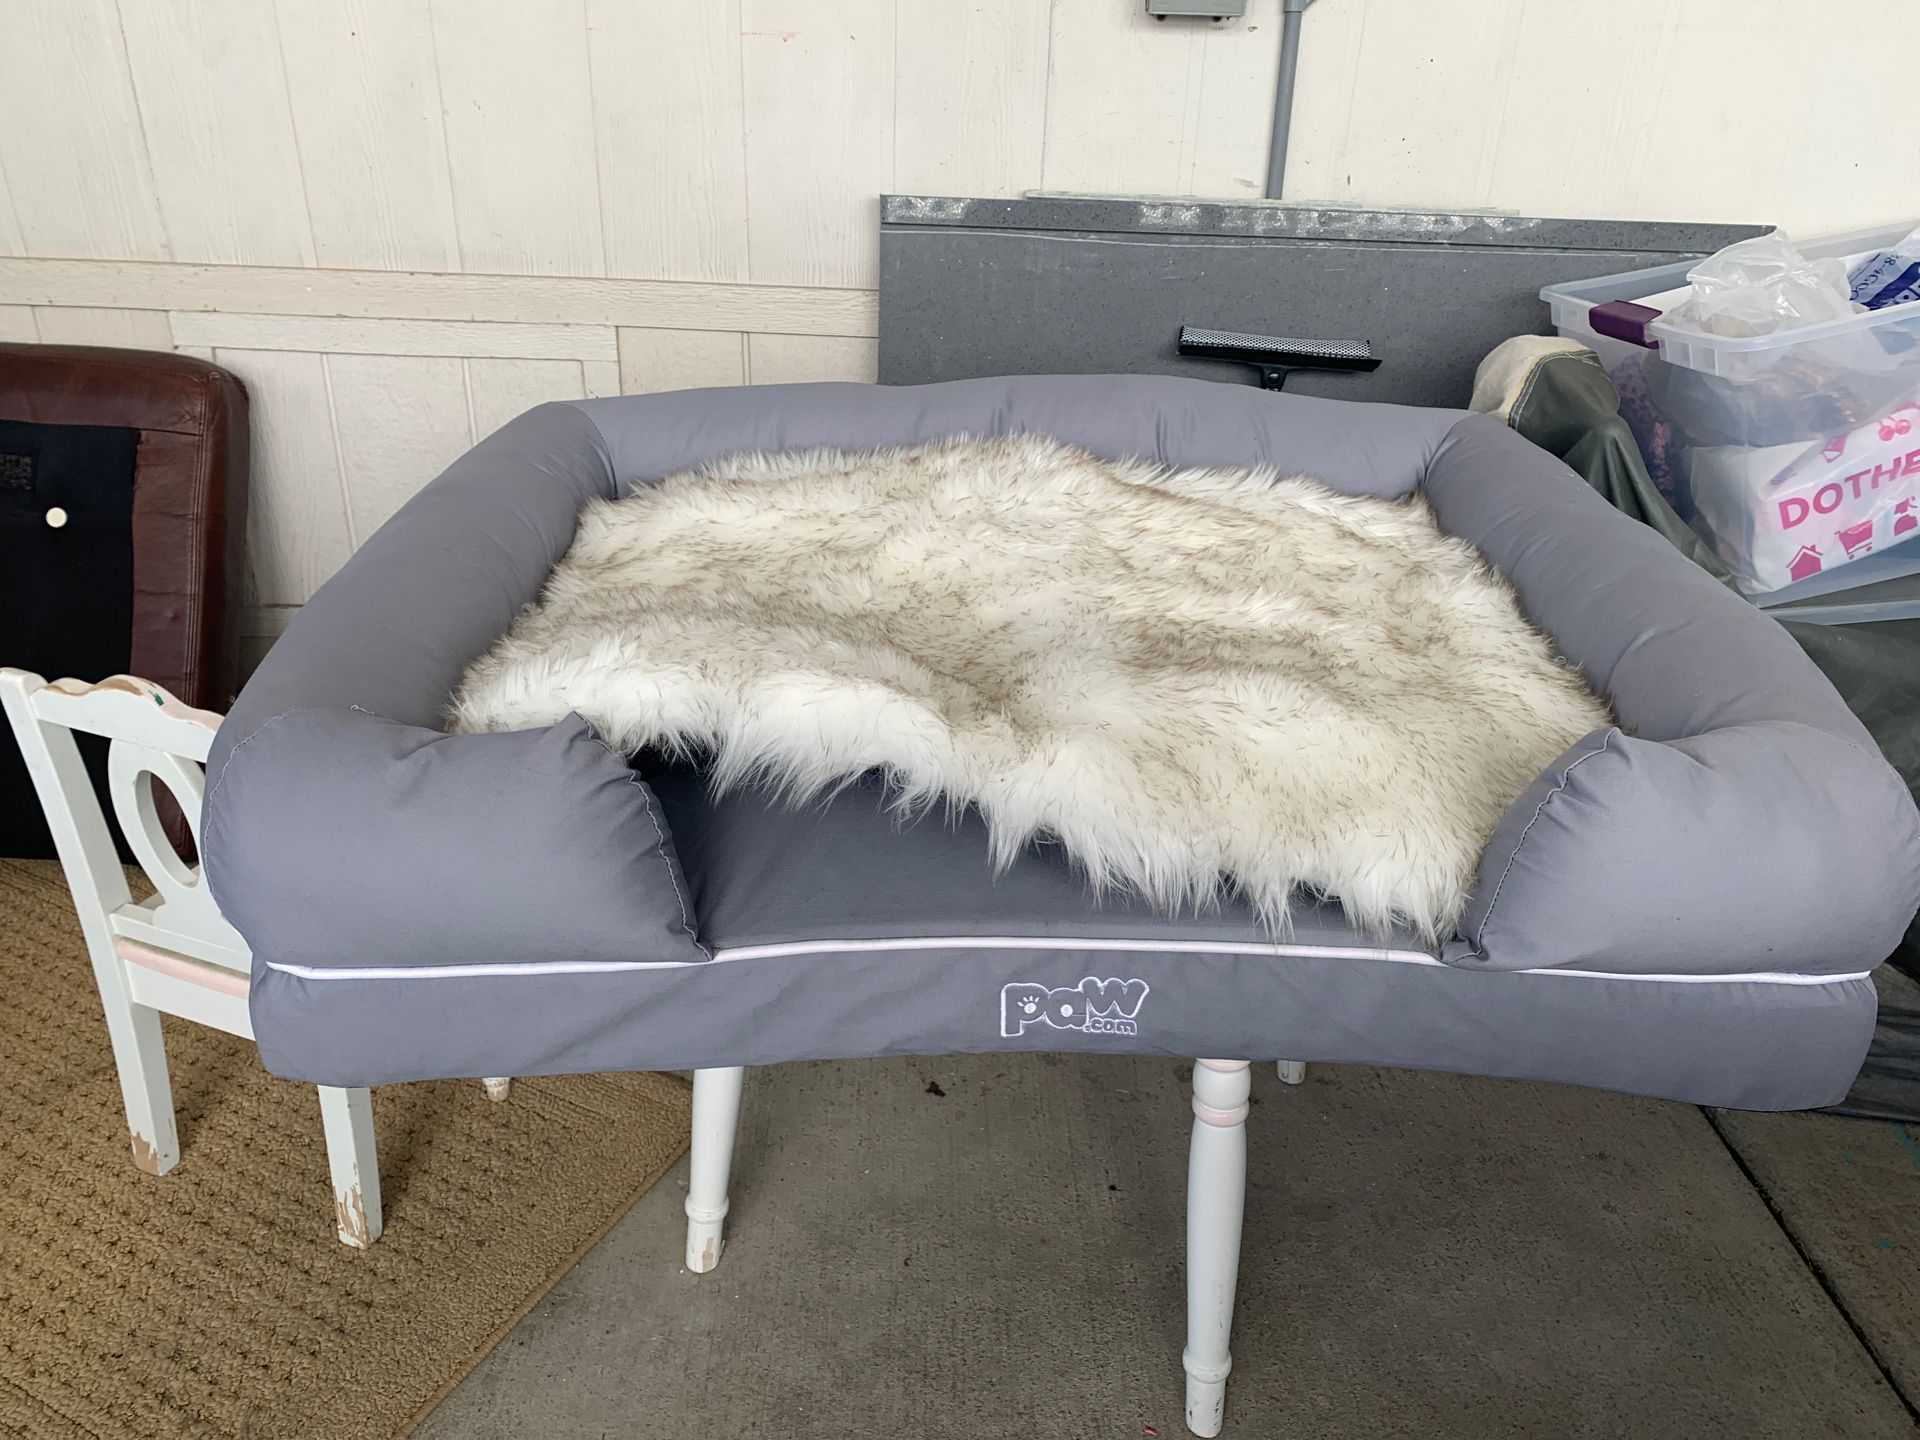 Paw.com bolster bed and topper